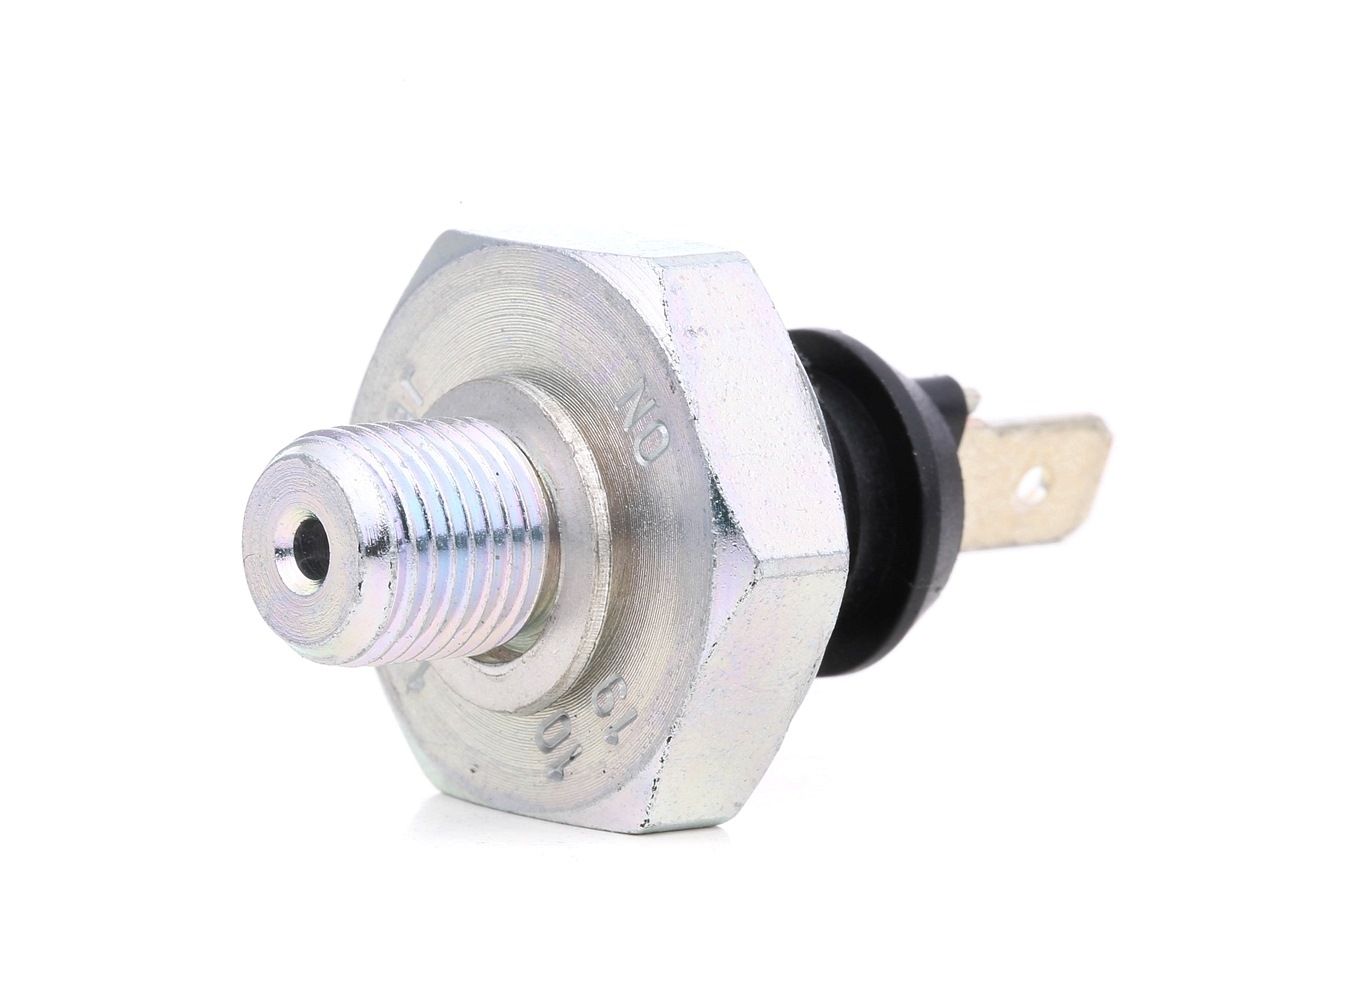 HELLA 6ZL 003 259-471 Oil Pressure Switch M10x1, 1,2 - 1,6 bar, Normally Open Contact